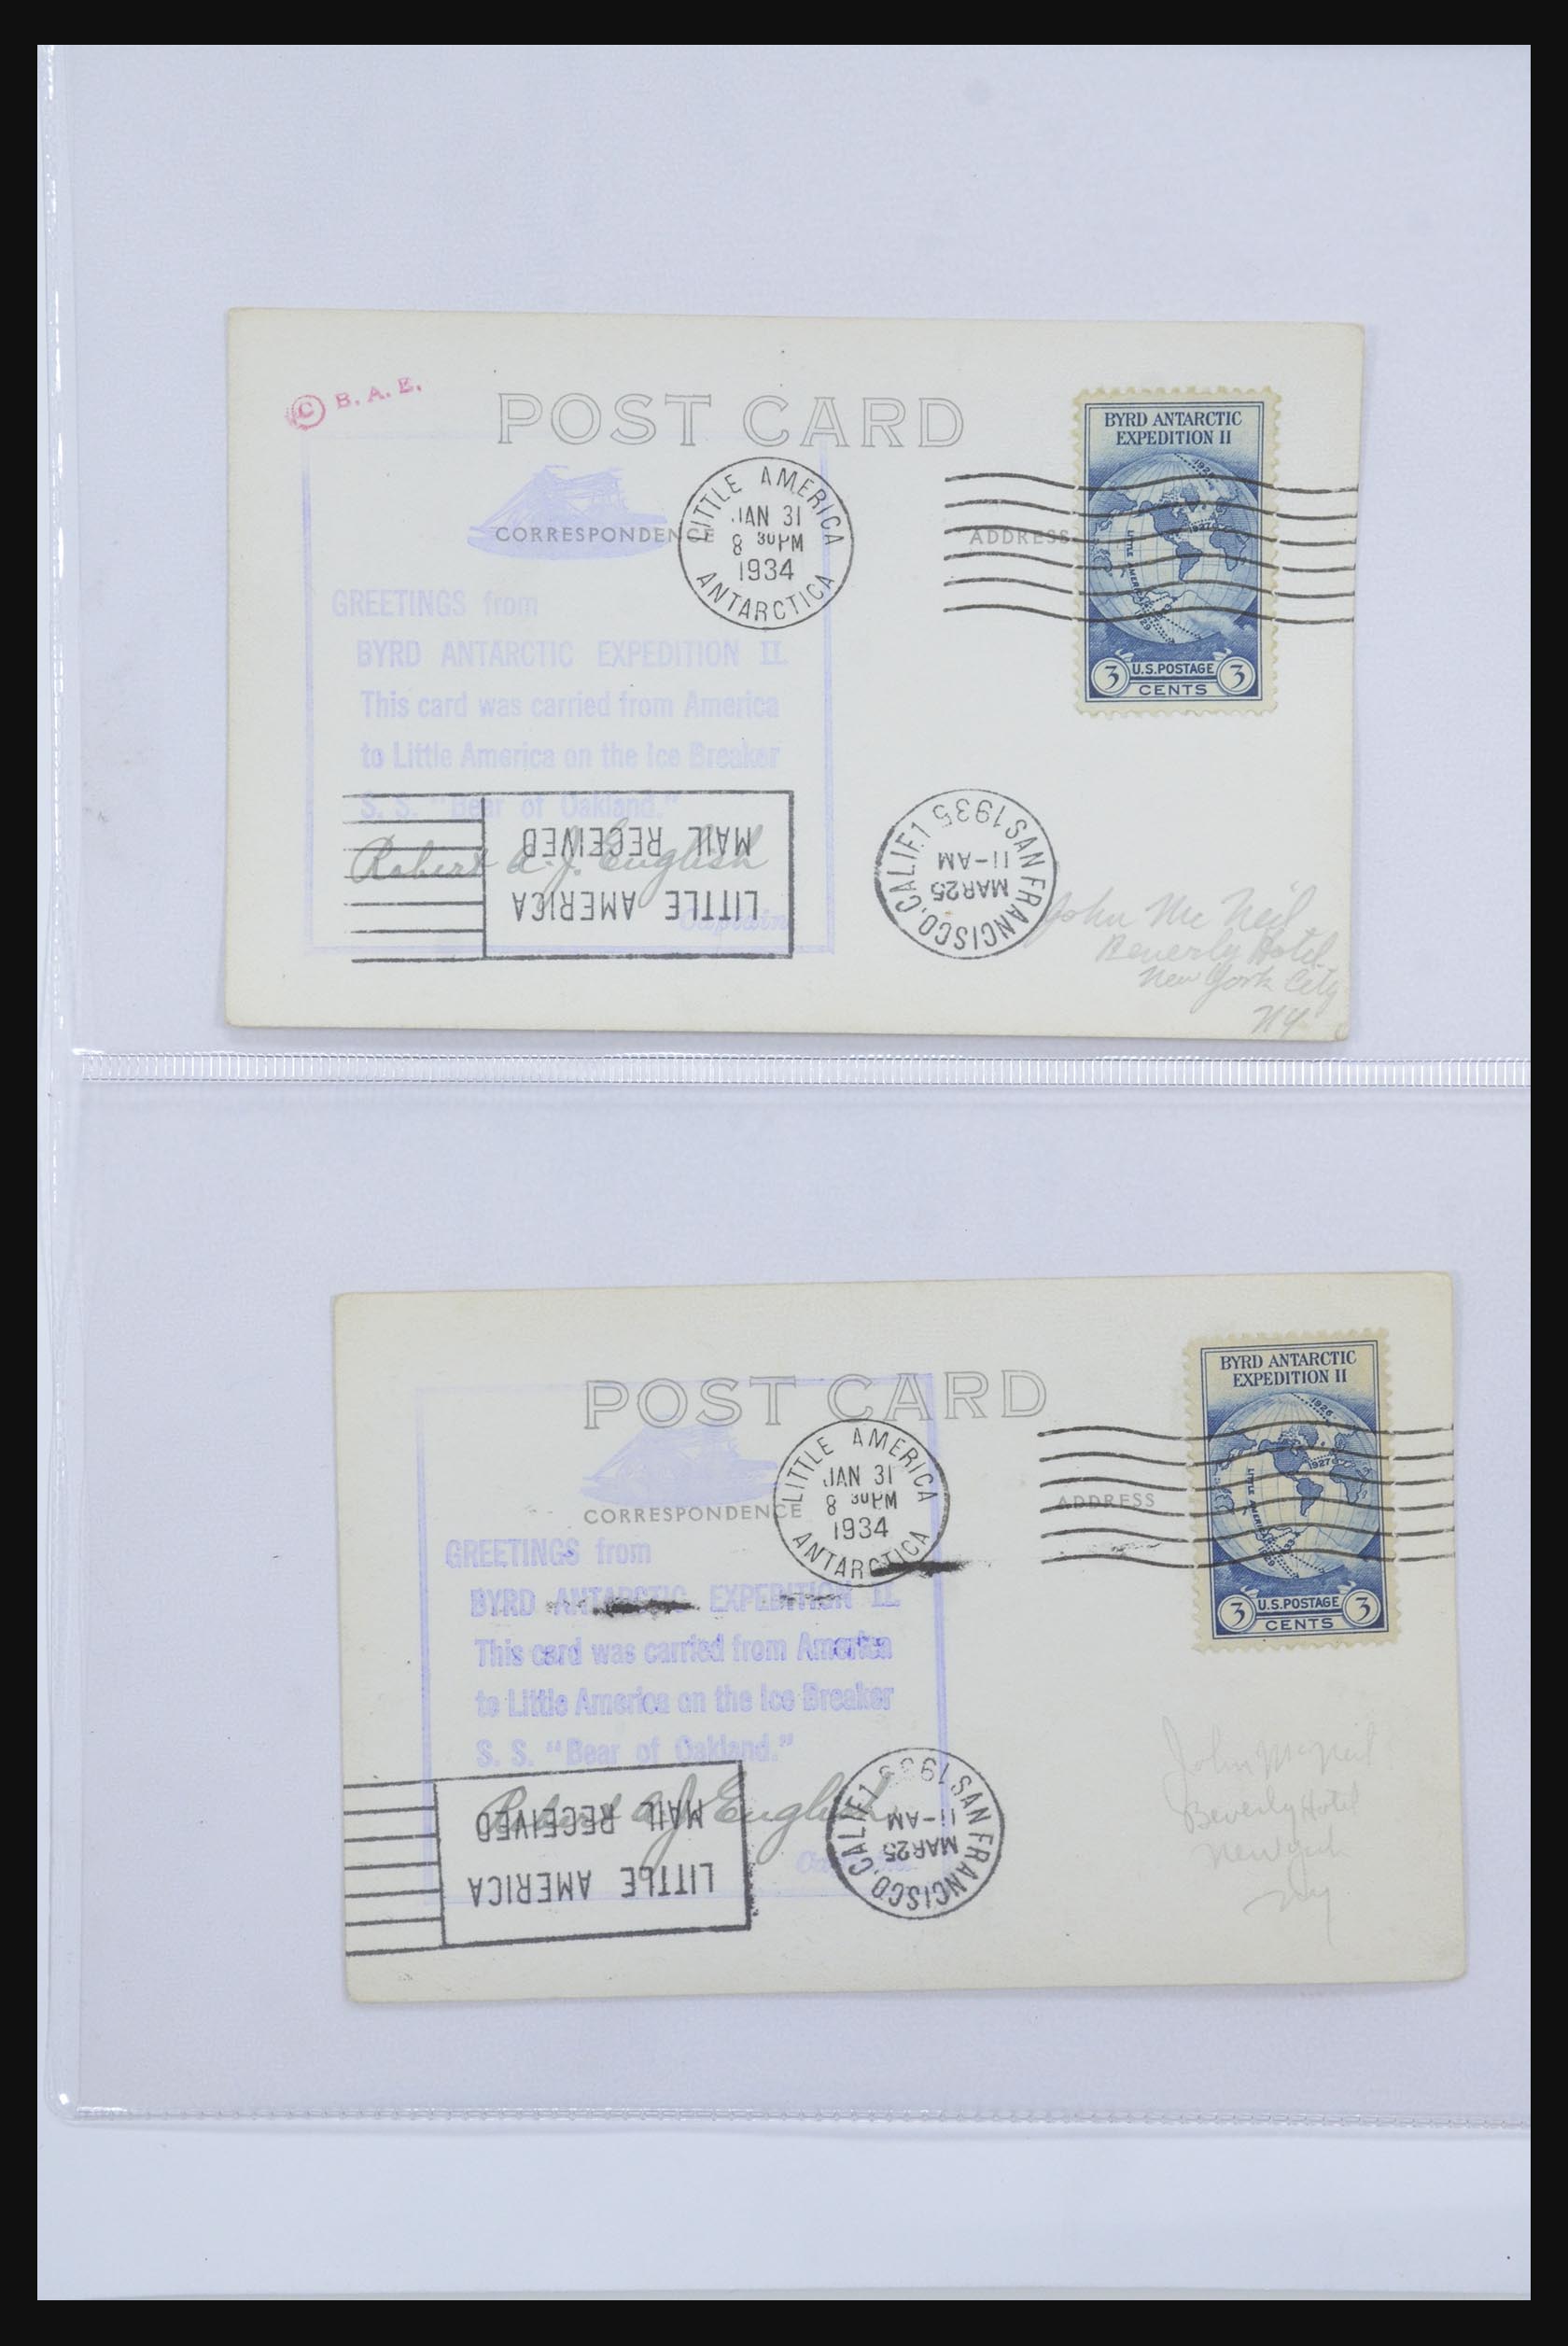 31627 010 - 31627 Byrd Antarctic Expedition 1934.